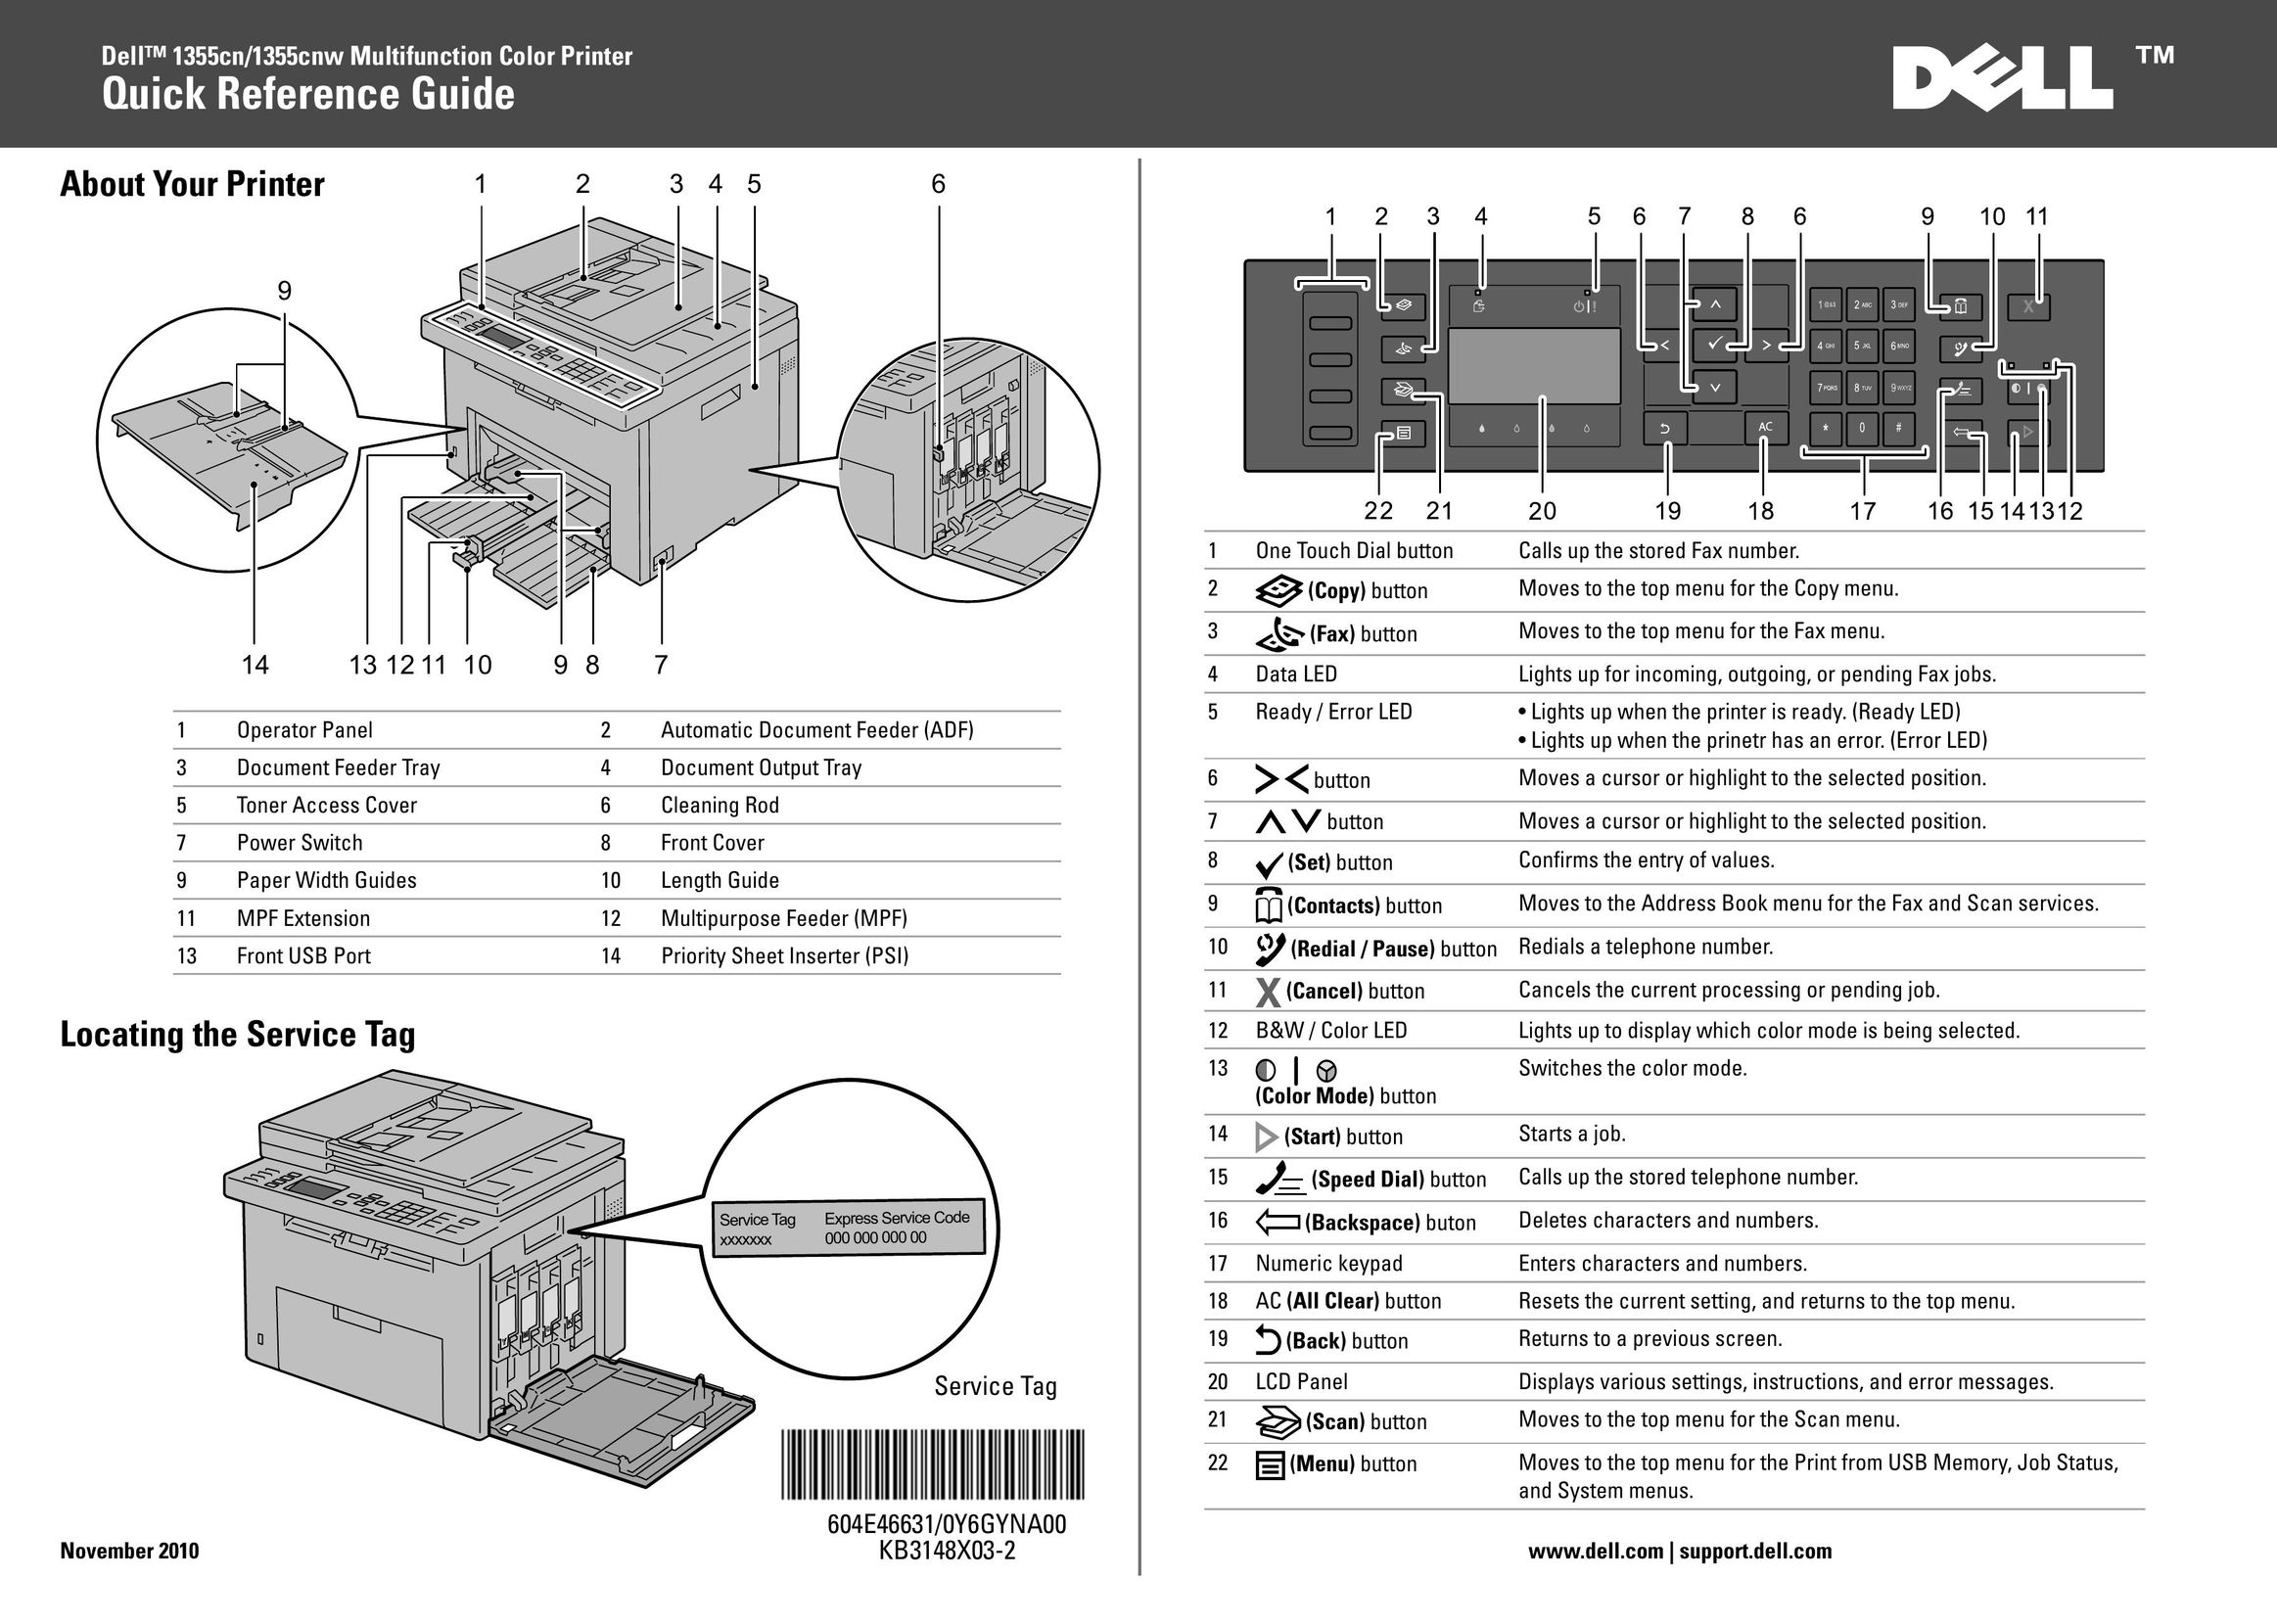 Dell 1355cn All in One Printer User Manual